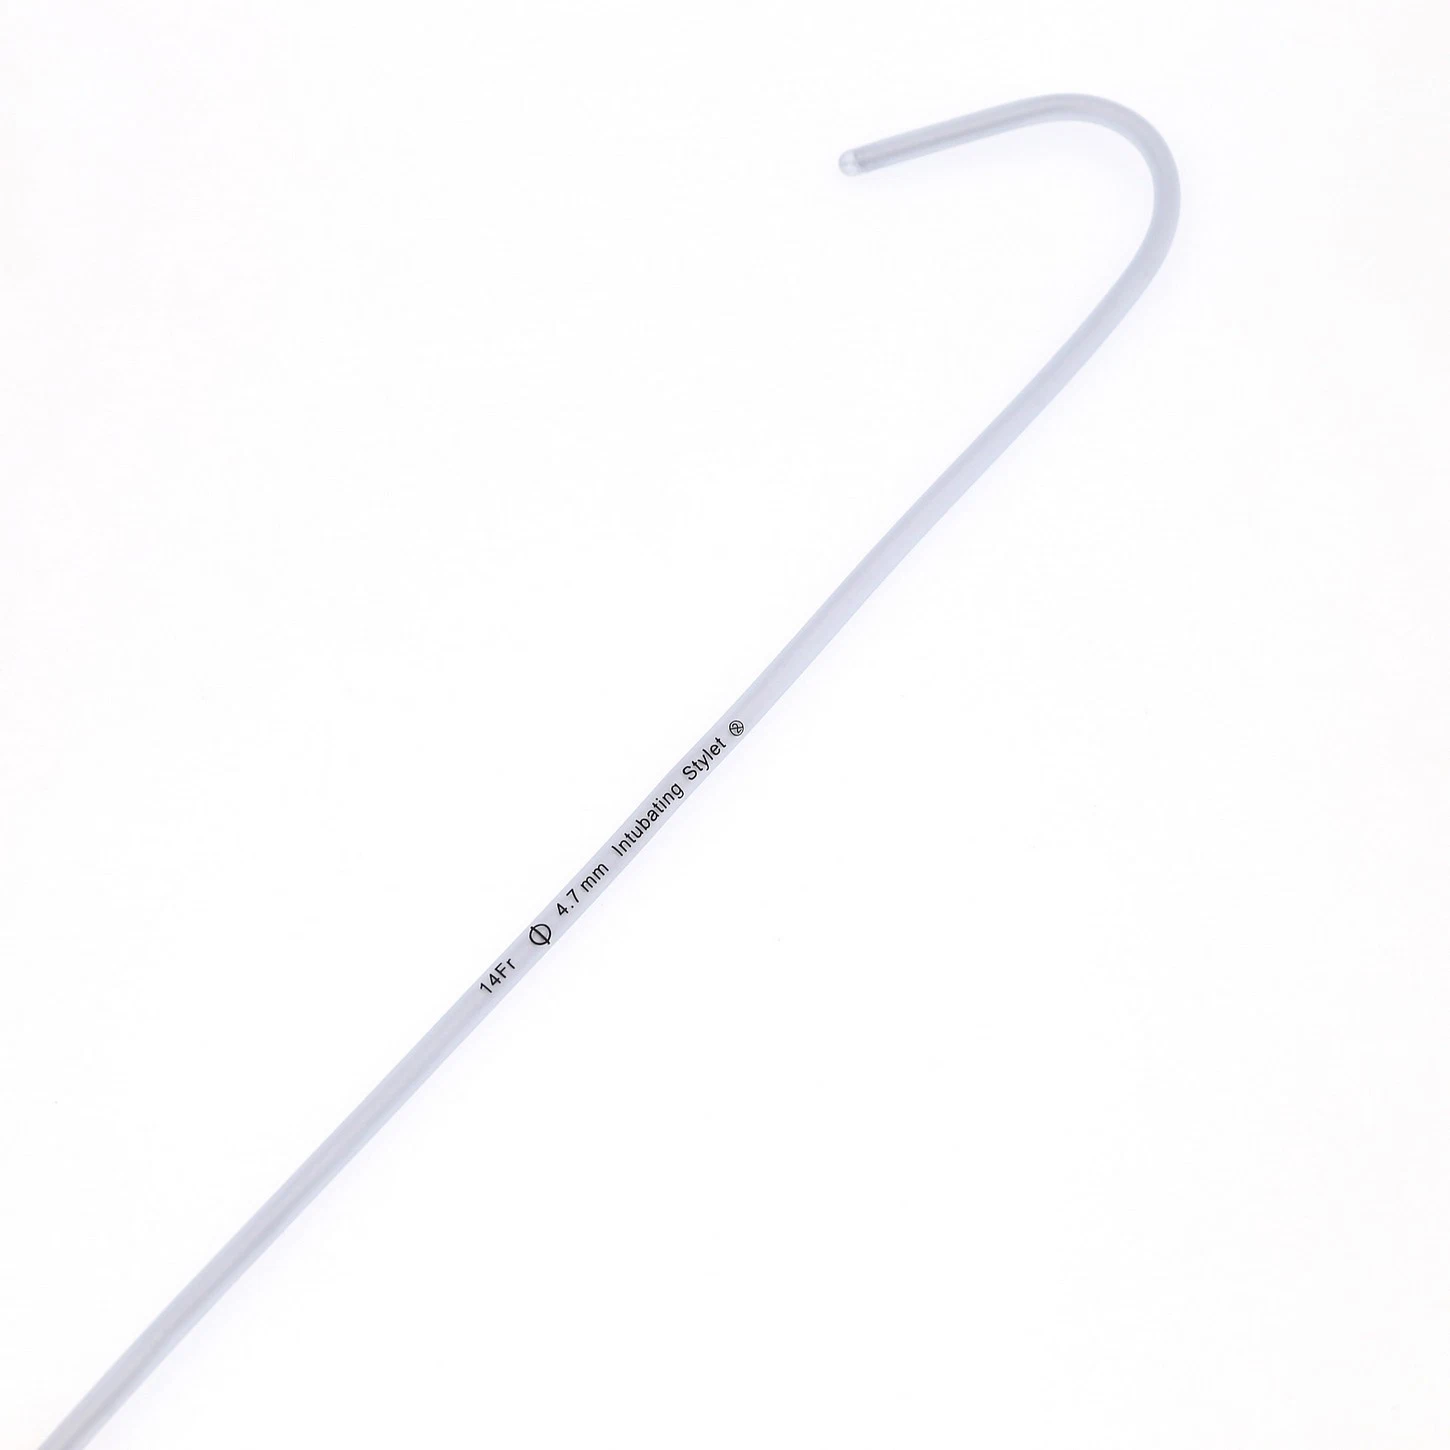 Medmount Medical Disposable Cuffed/Uncuffed Left-Sided/Right-Sided Endotracheal Tube with Pre-Loaded Stylet